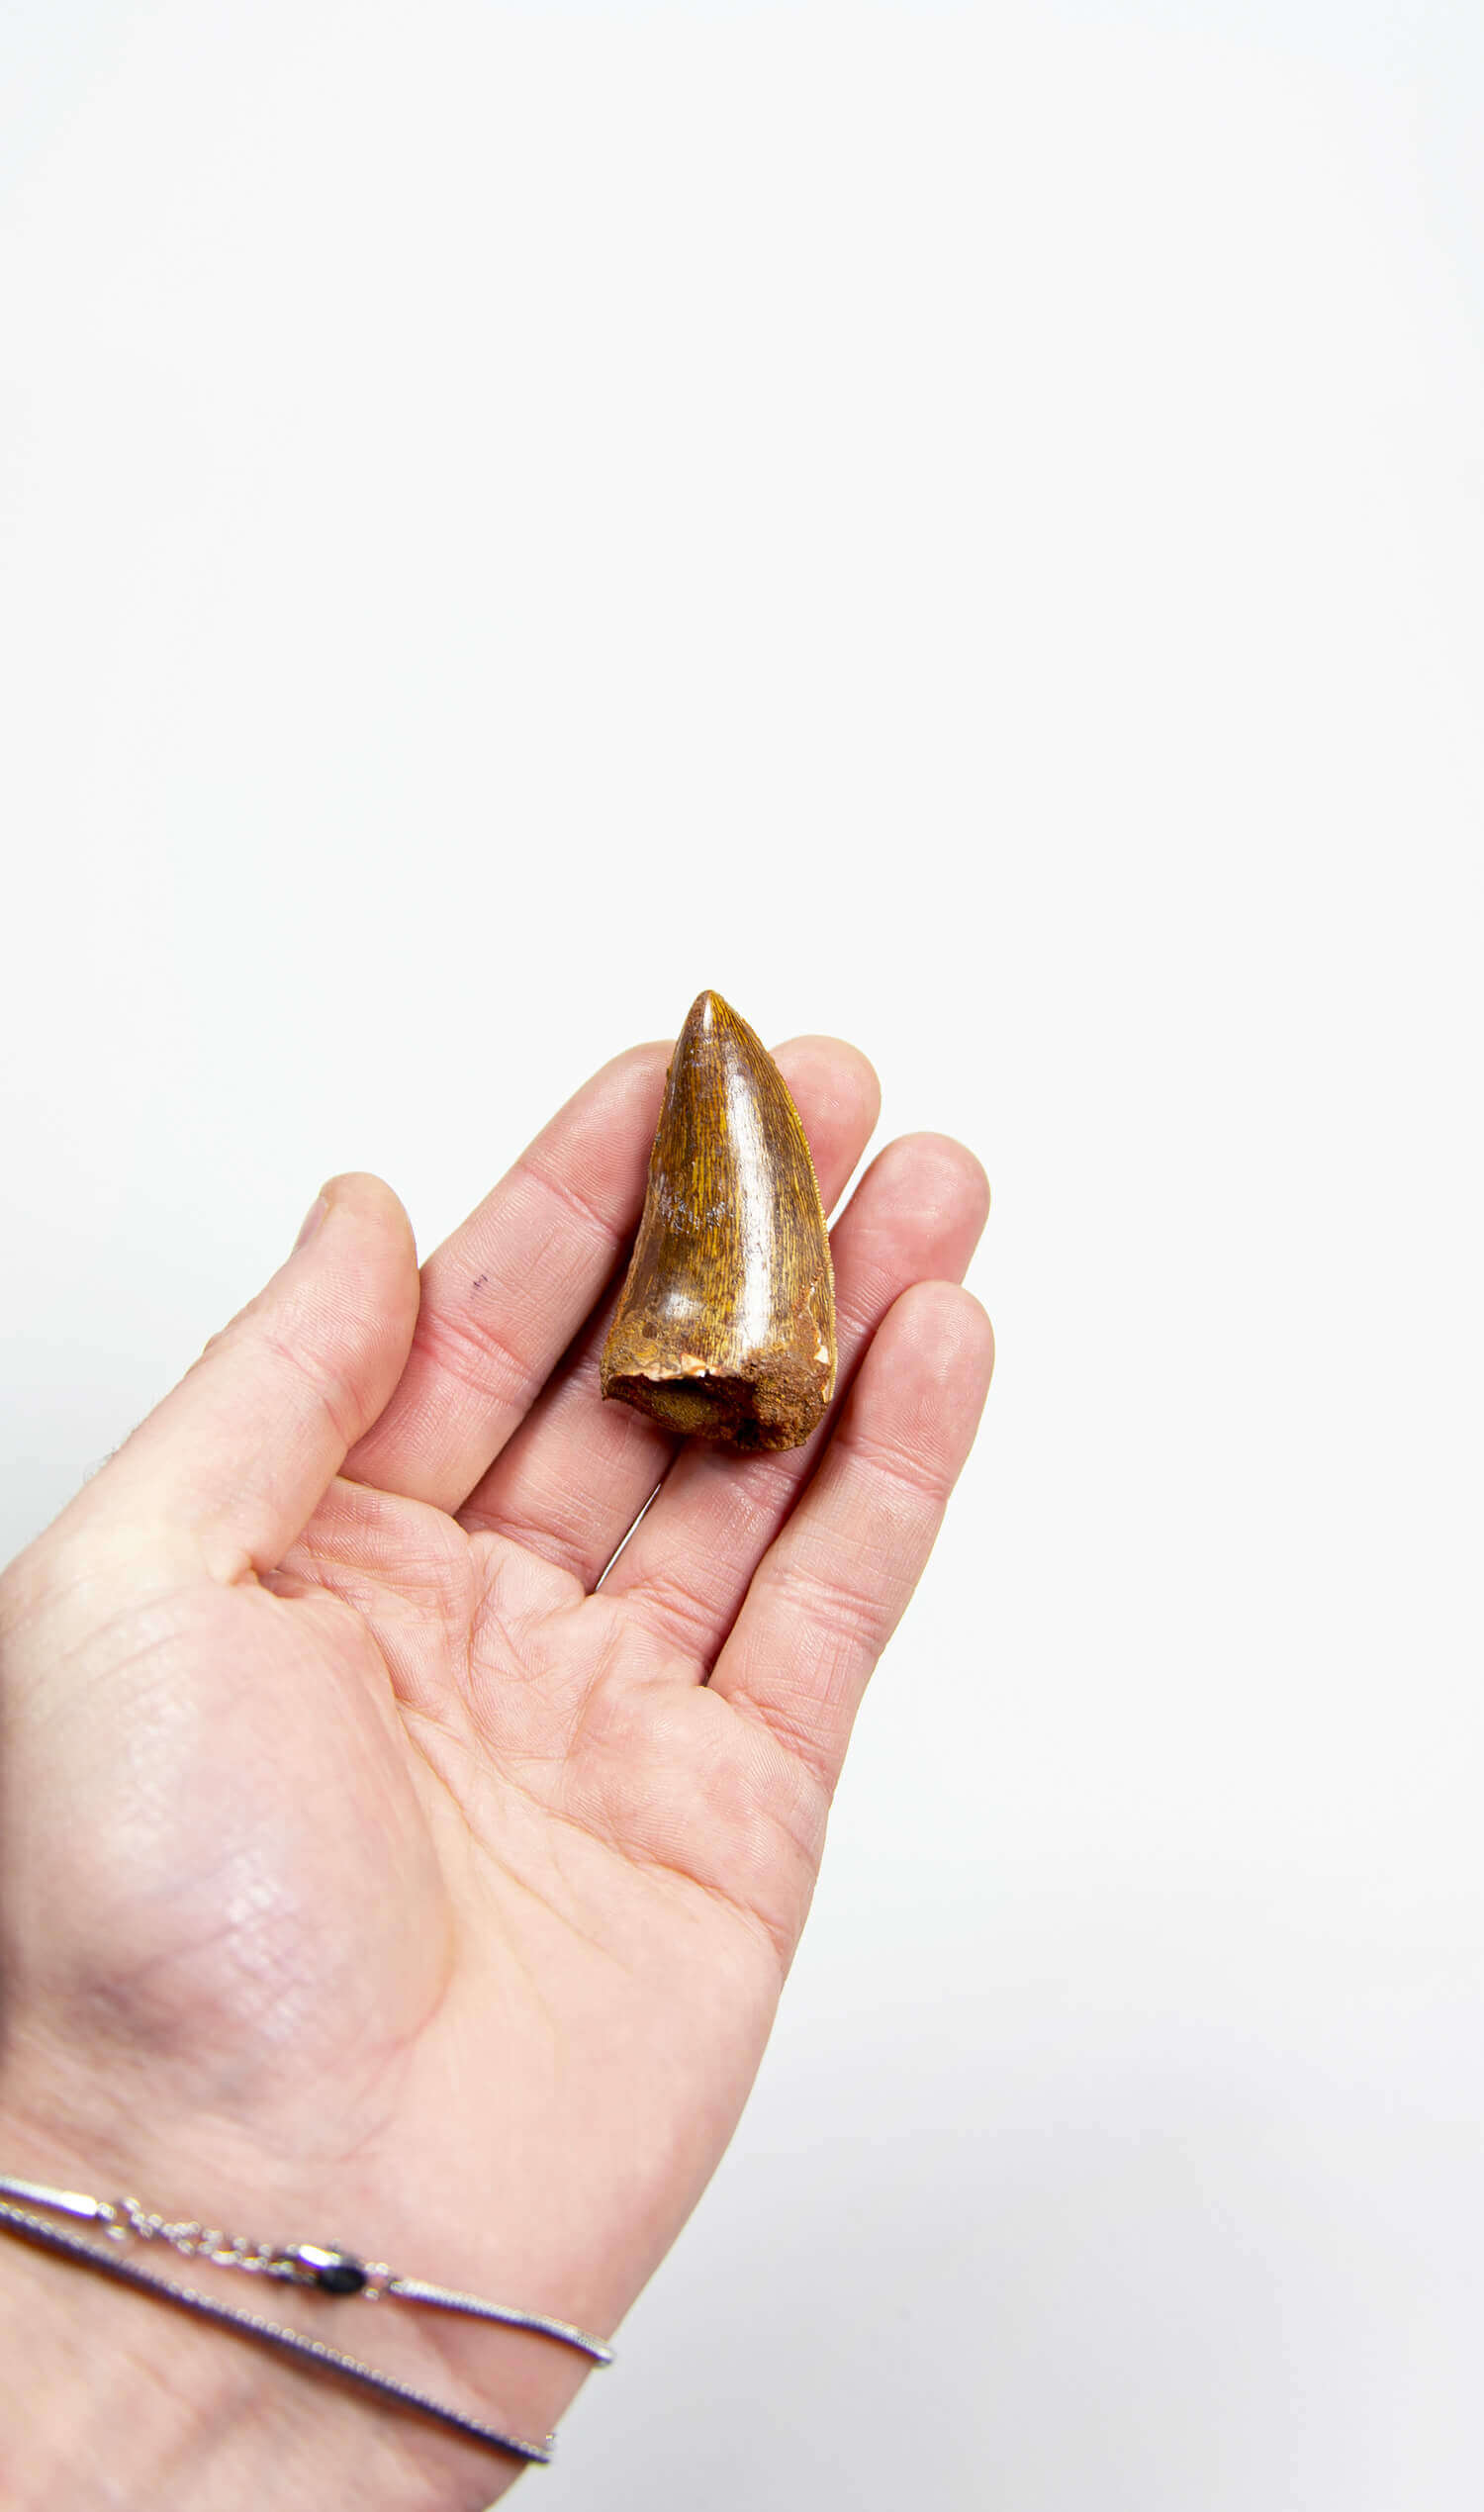 real fossil dinosaur carcharodontosaurus tooth for sale at the uk fossil store 59